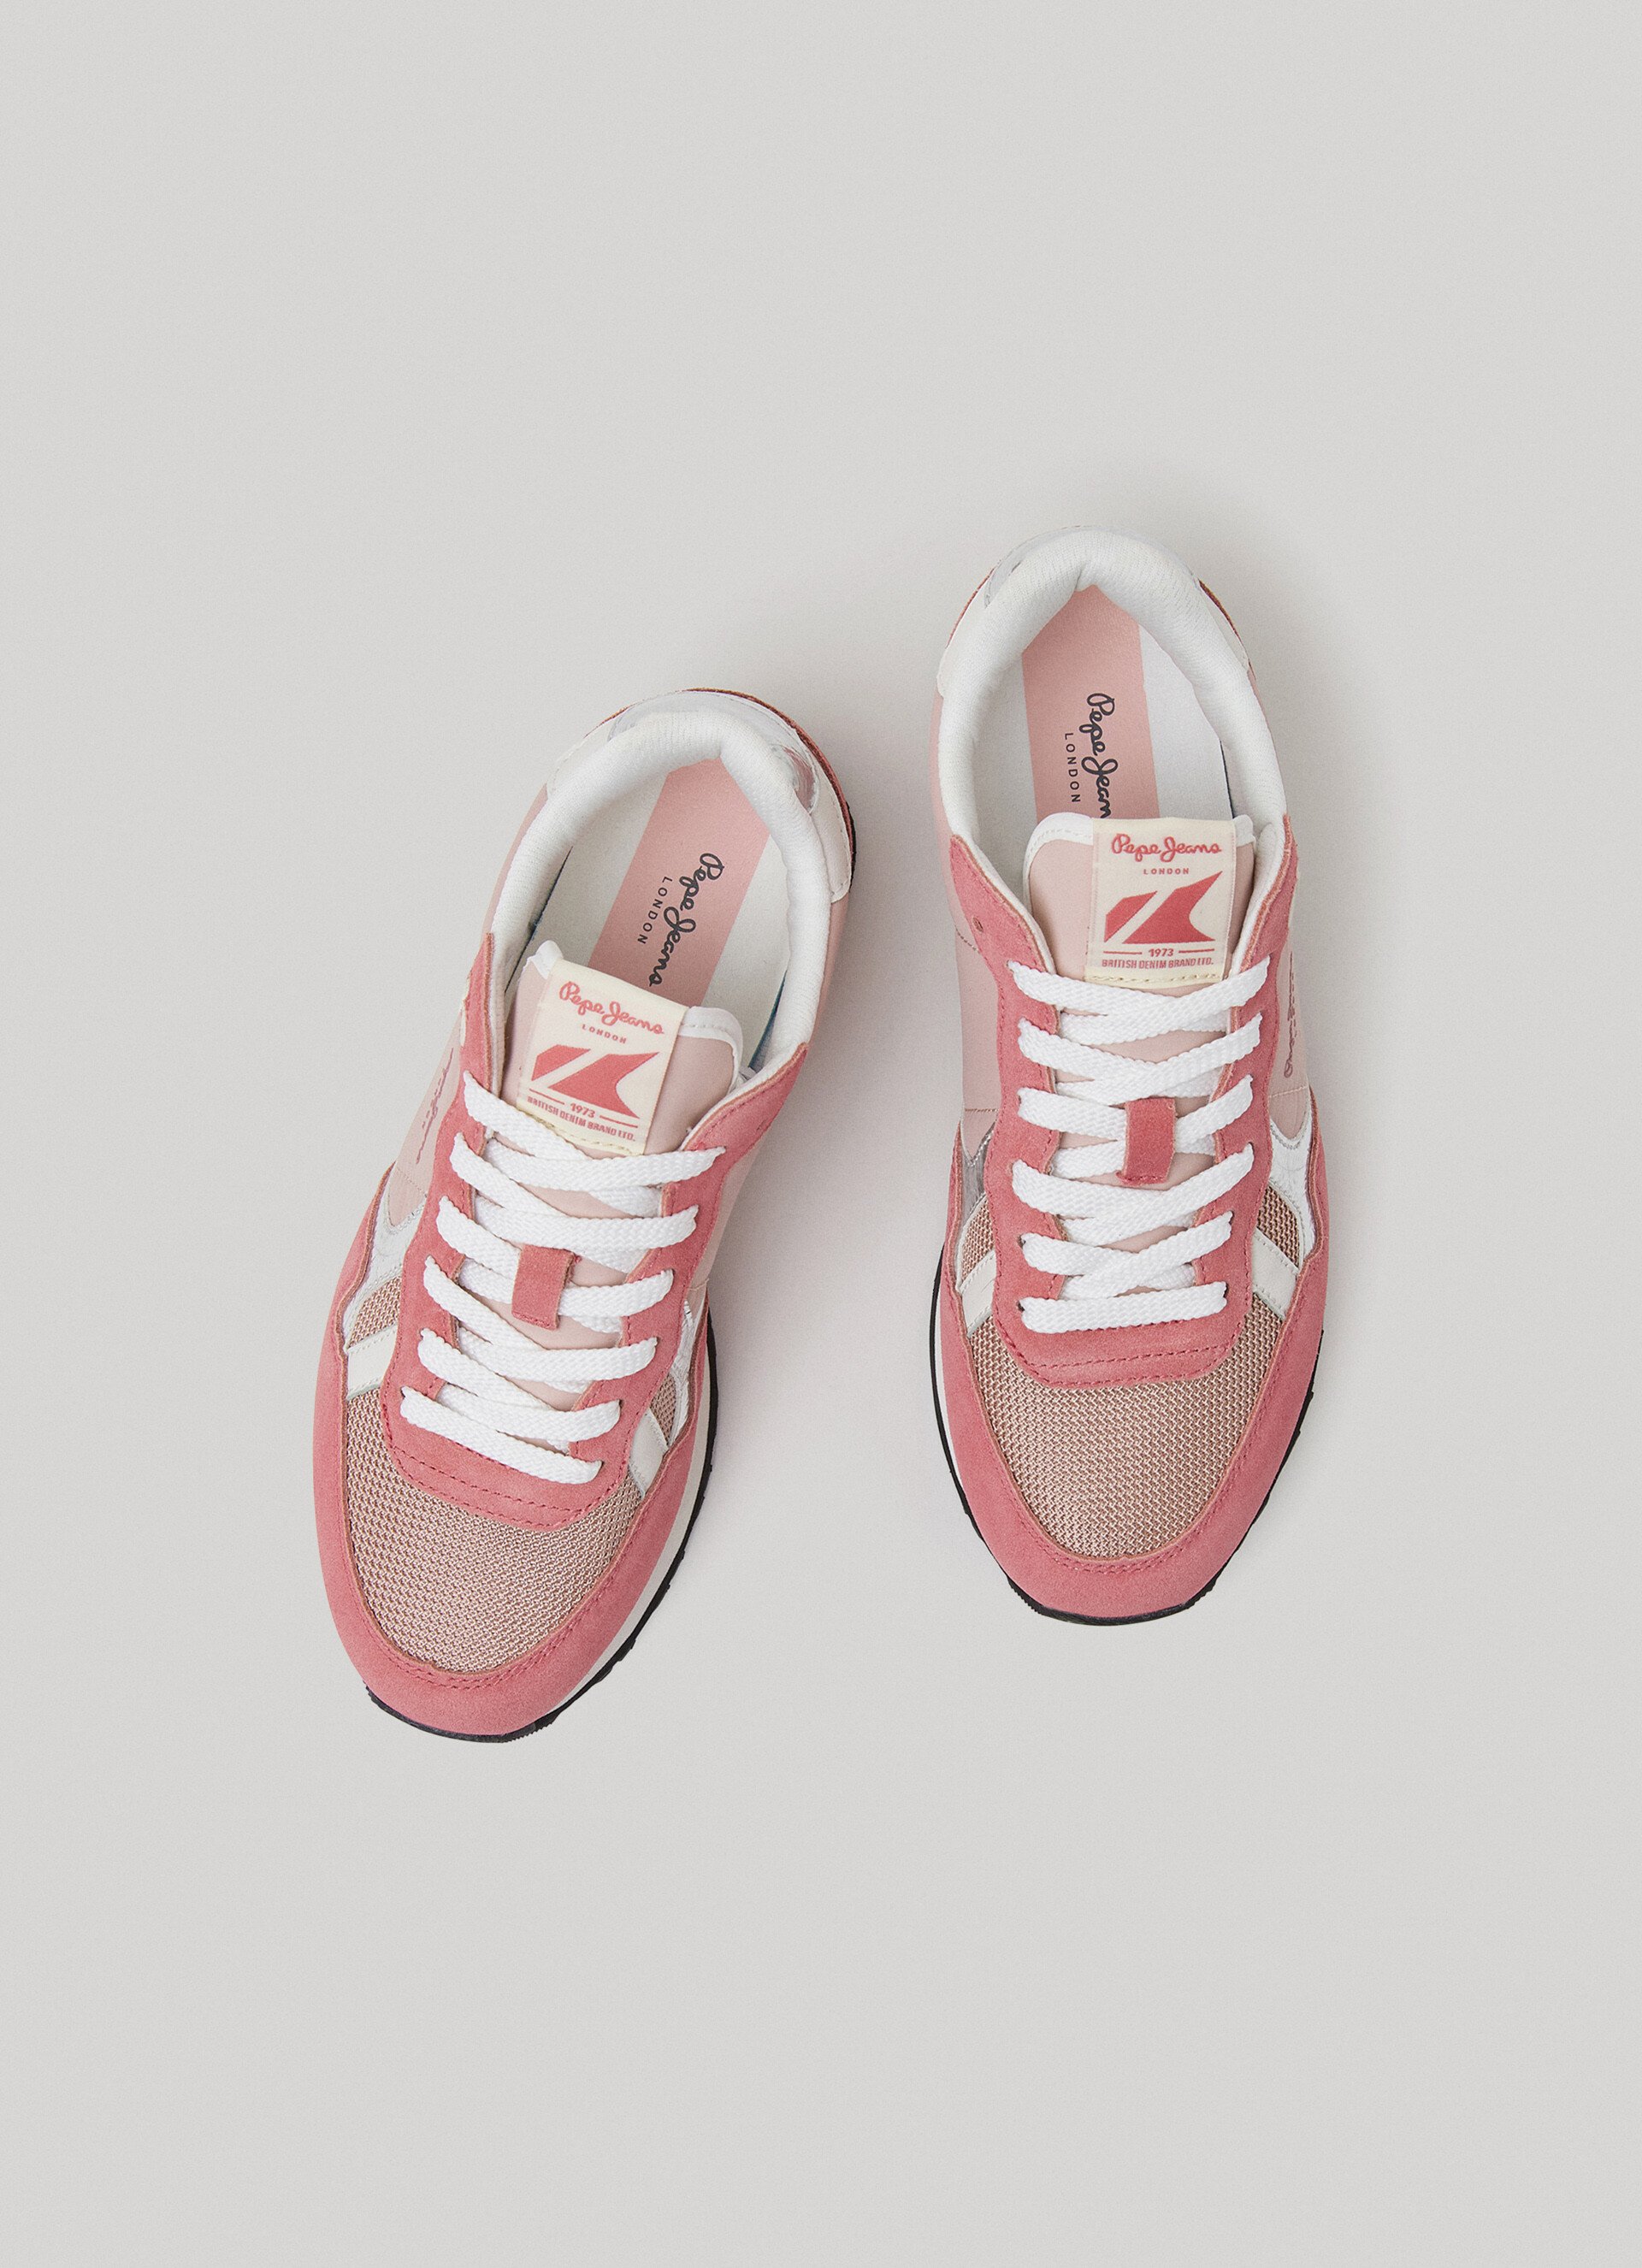 Brit Heritage Combined Sneakers | Pepe Jeans